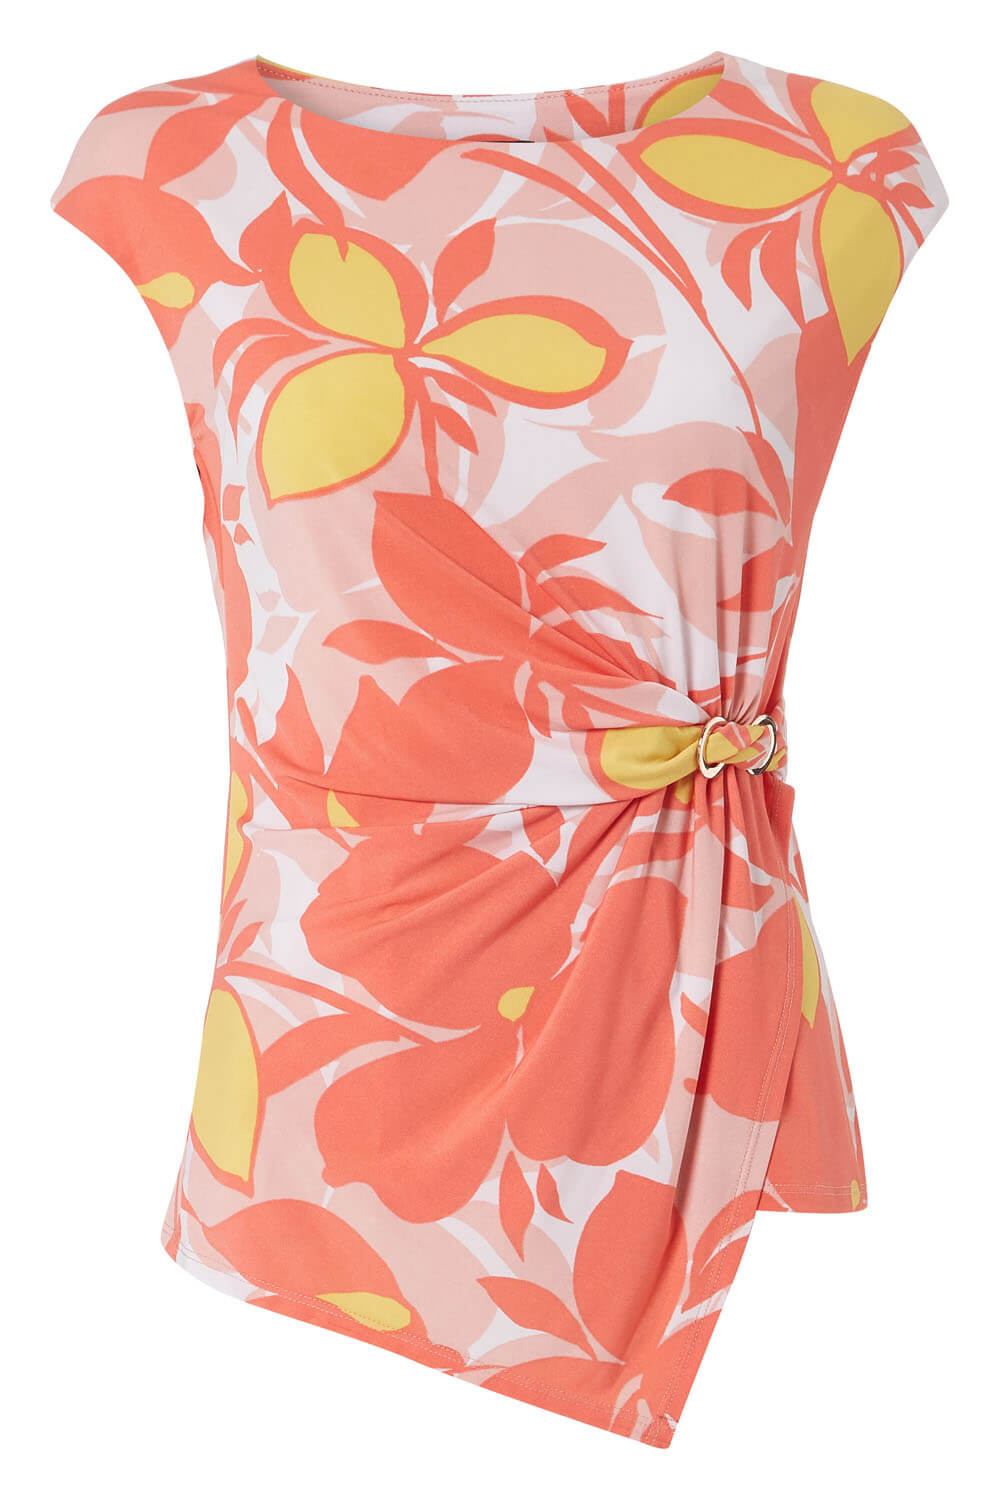 CORAL Ruched Side Floral Print Top, Image 4 of 4